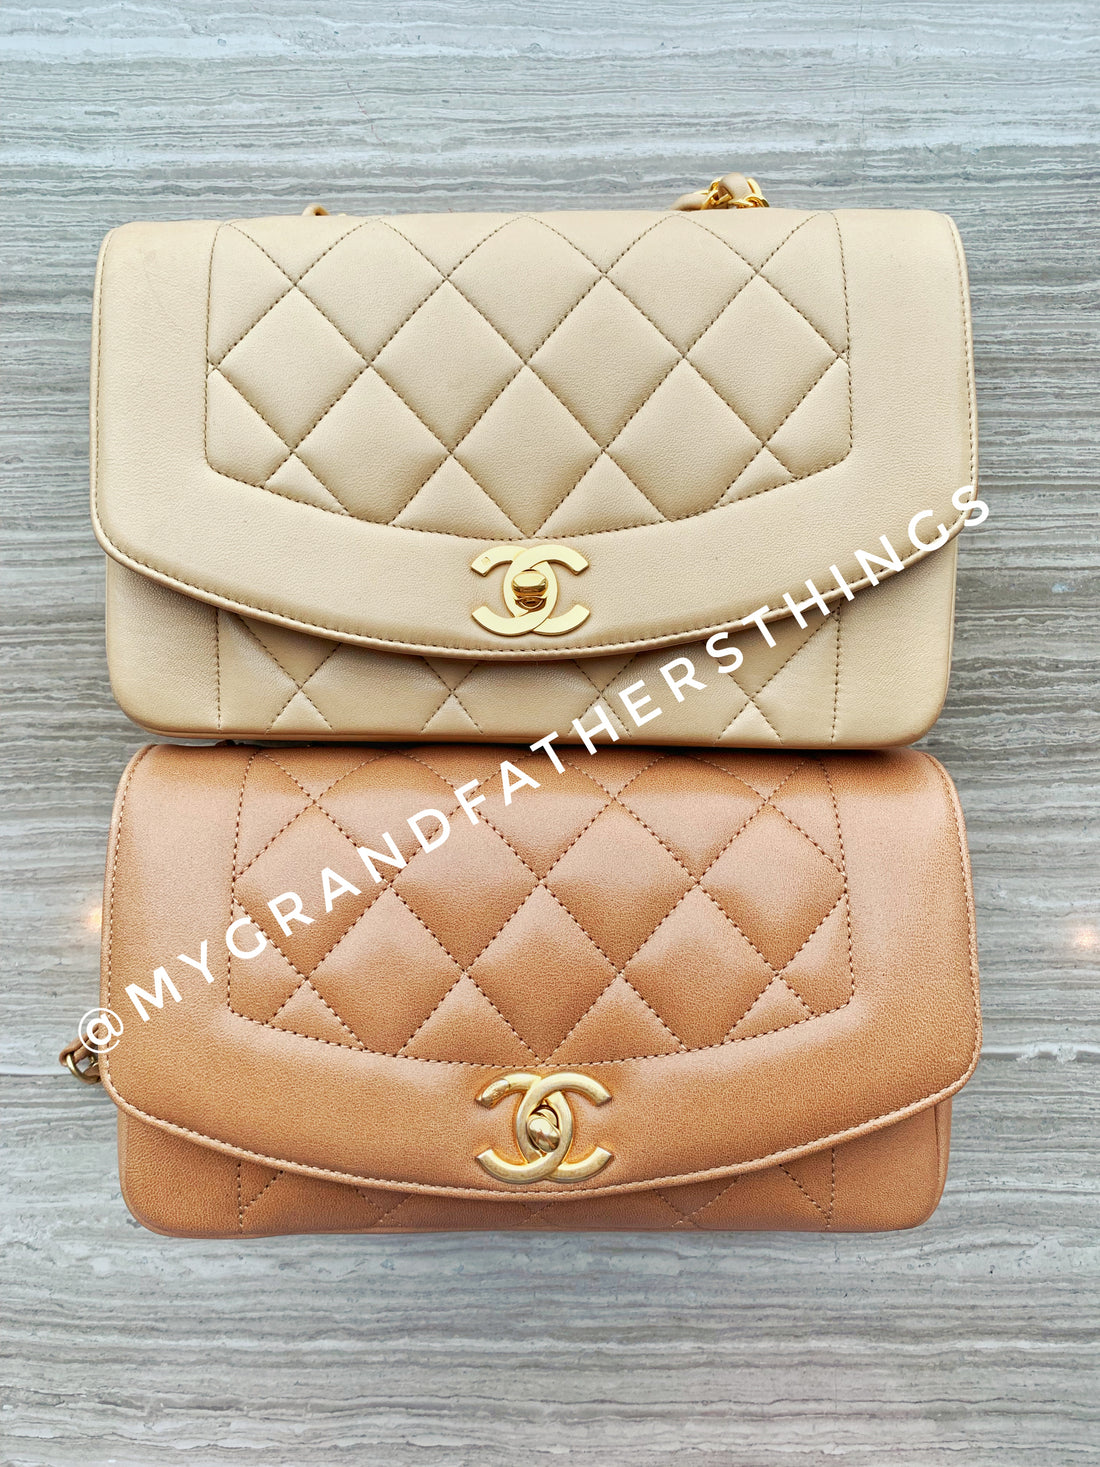 CHANEL Beige Leather Curved Quilted Mini Flap Gold CC Crossbody Shoulder Bag